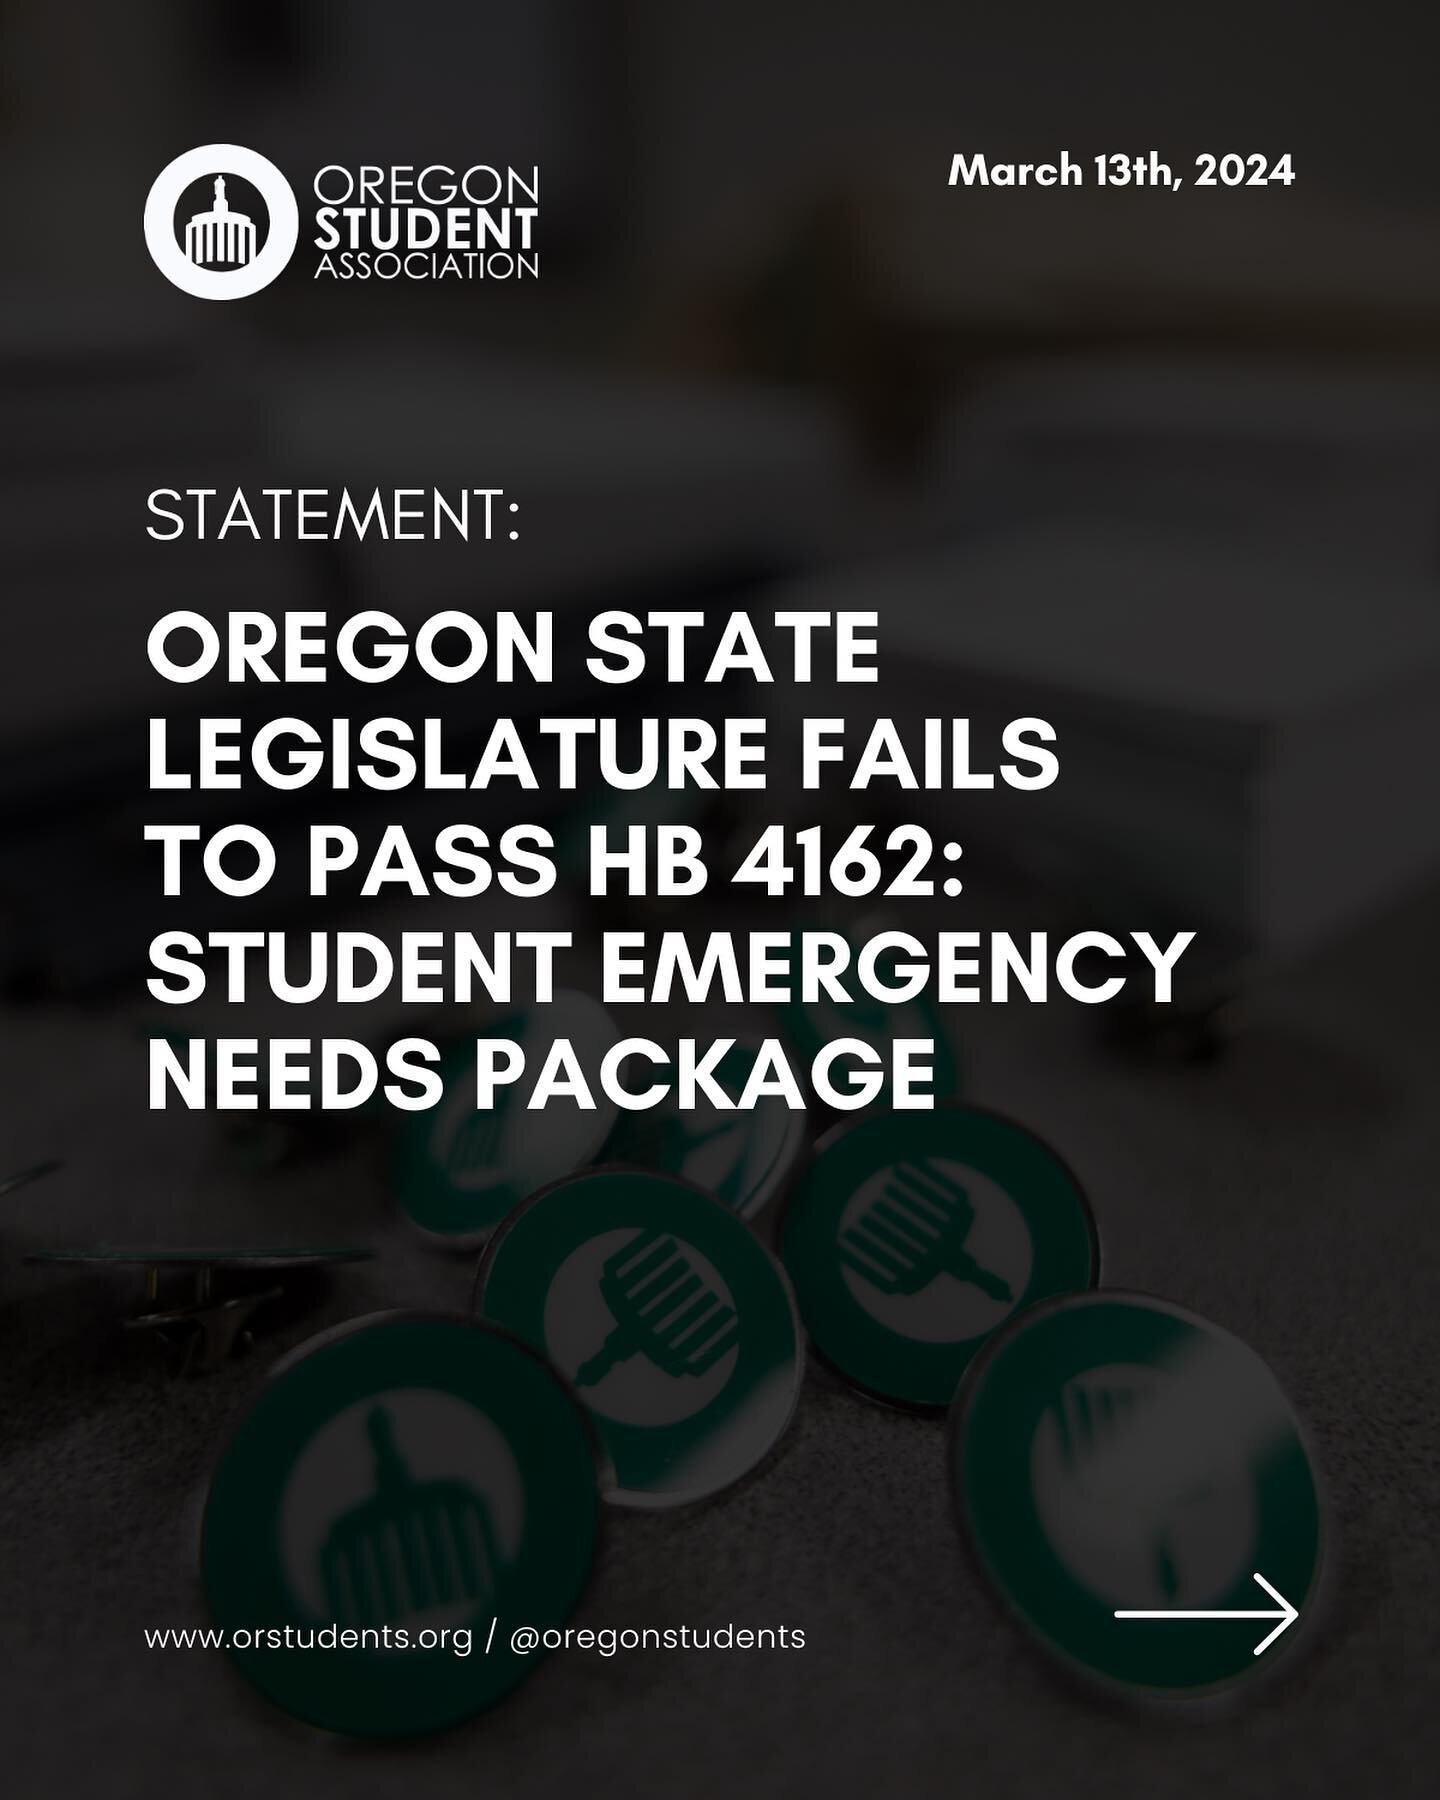 Please read our statement on the Oregon State Legislature&rsquo;s failure to pass HB 4162: The Student Emergency Needs Package&hellip;➡️

We are disappointed to share that HB 4162: The Student Emergency Needs Package did not move forward during the 2